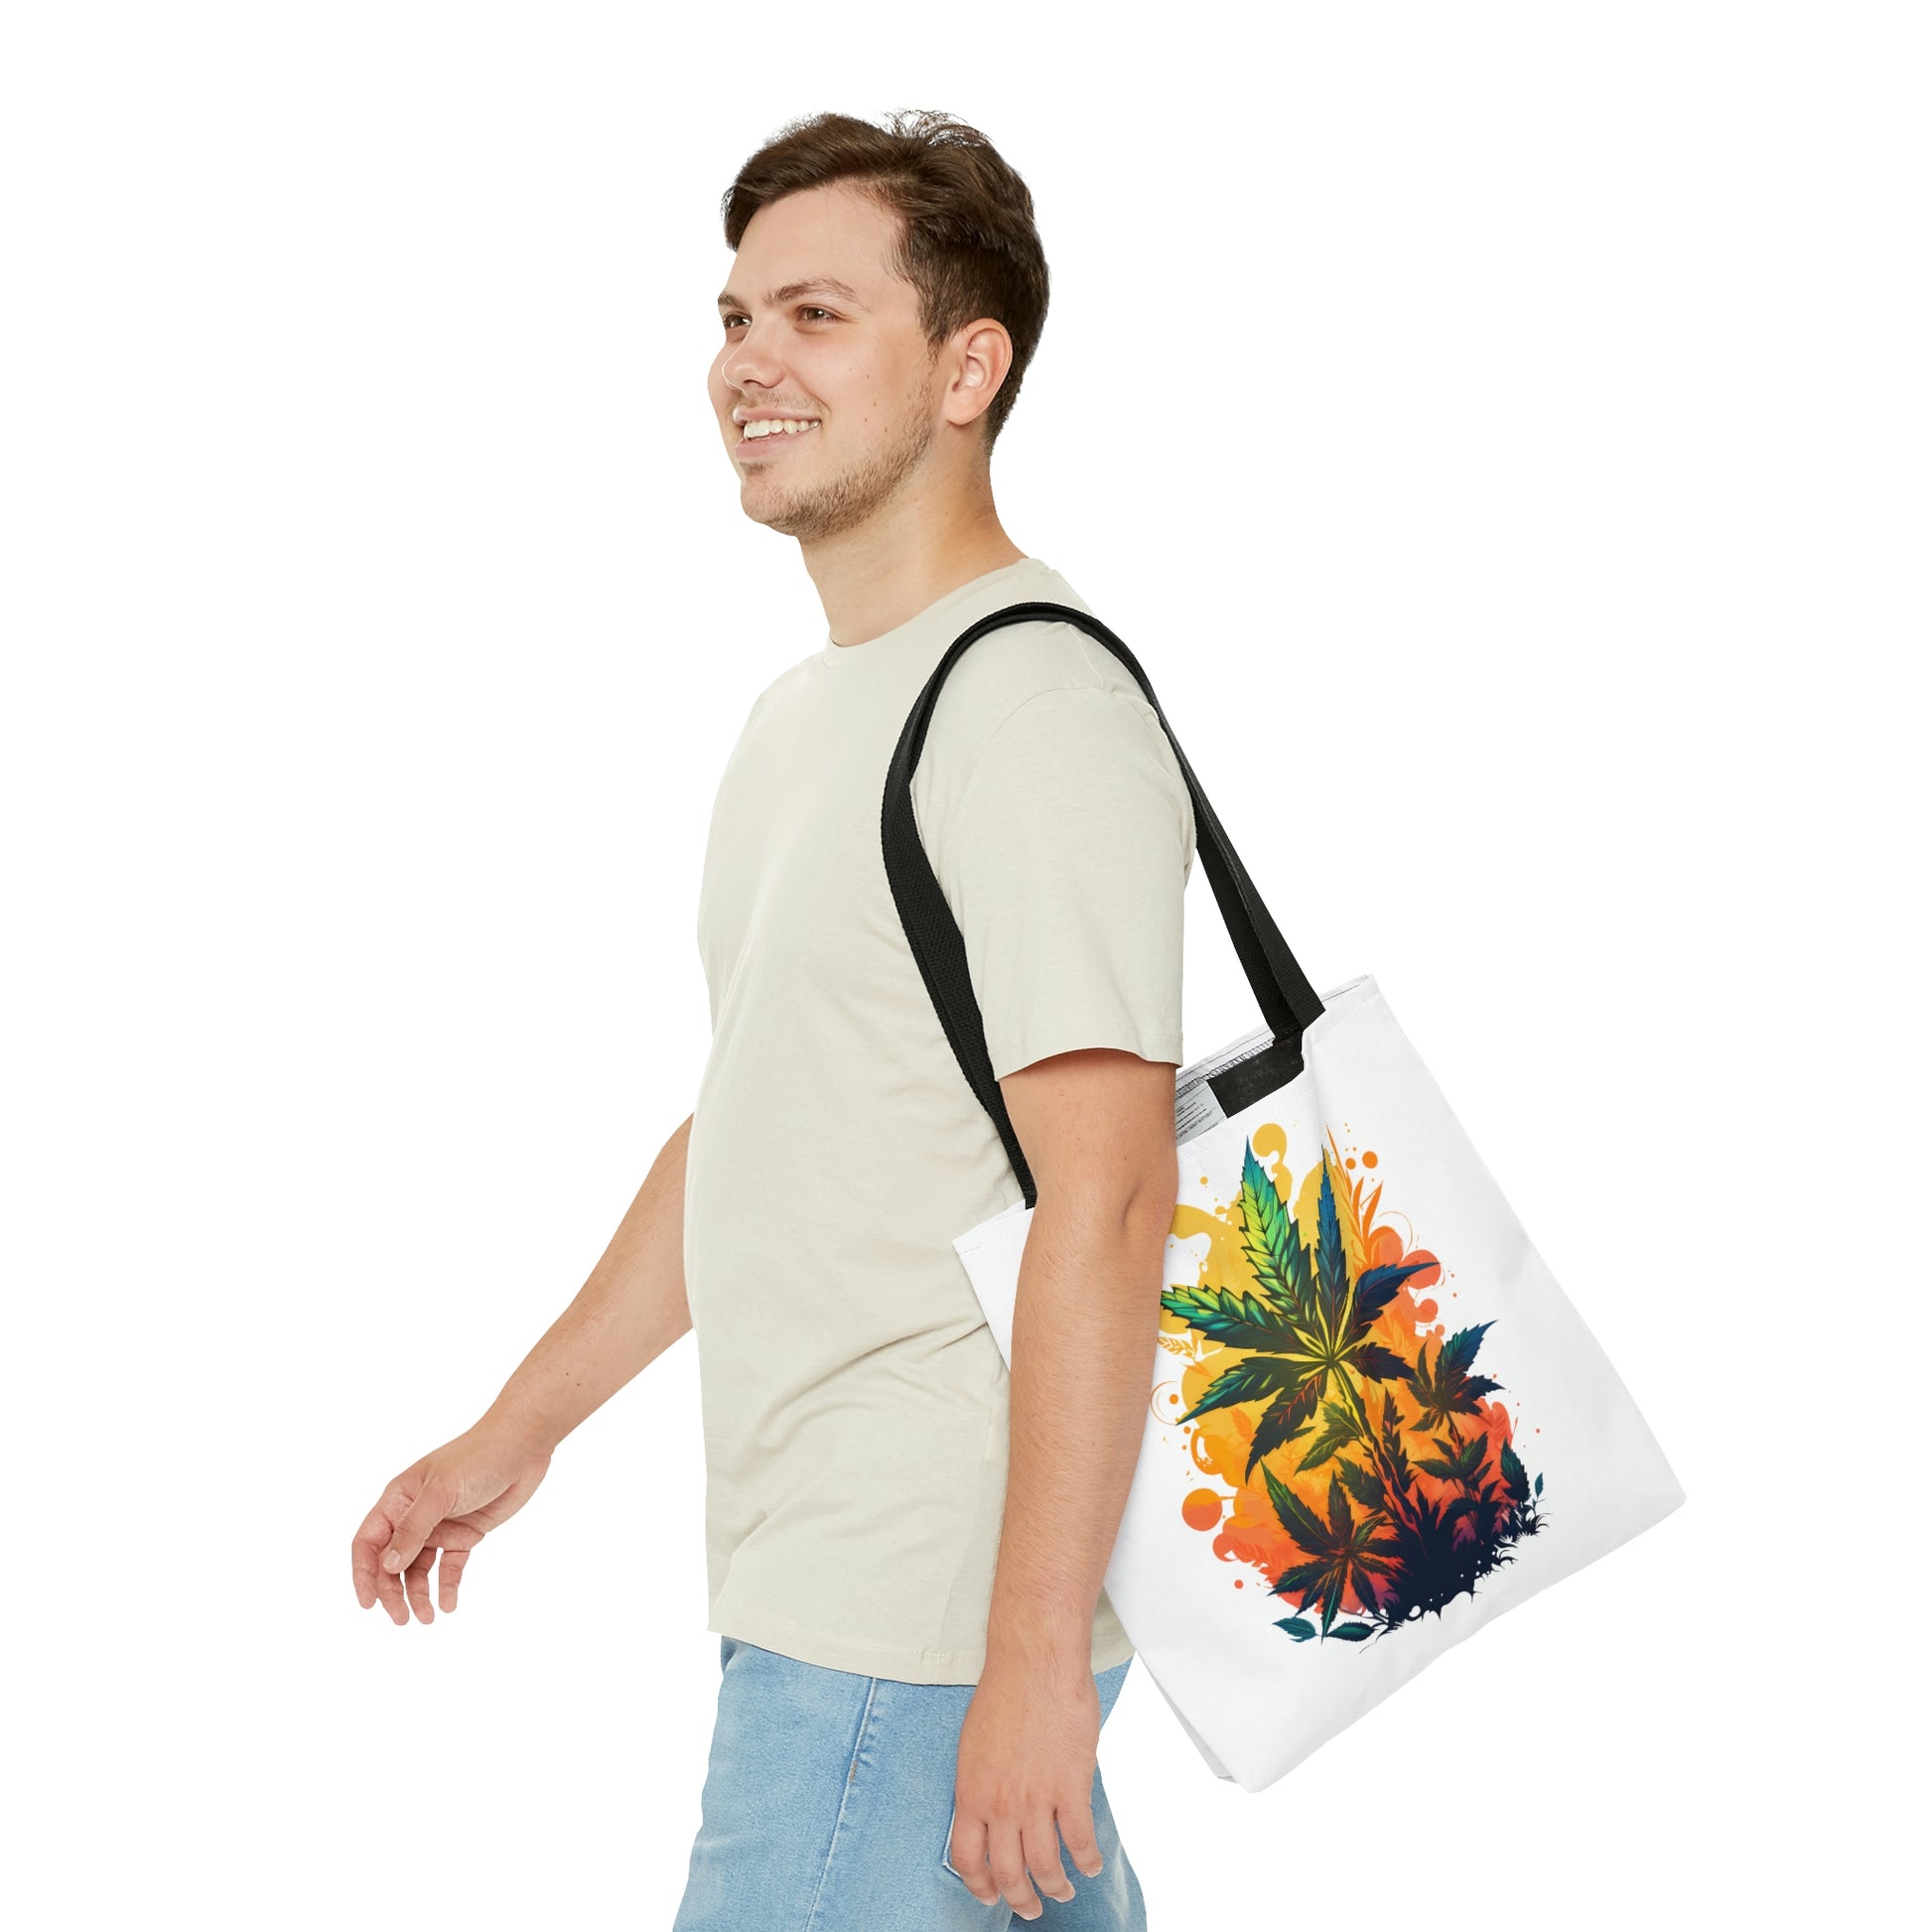 A man in a tan shirt is walking with the Cannabis Warm Paradise Tote Bag while smiling